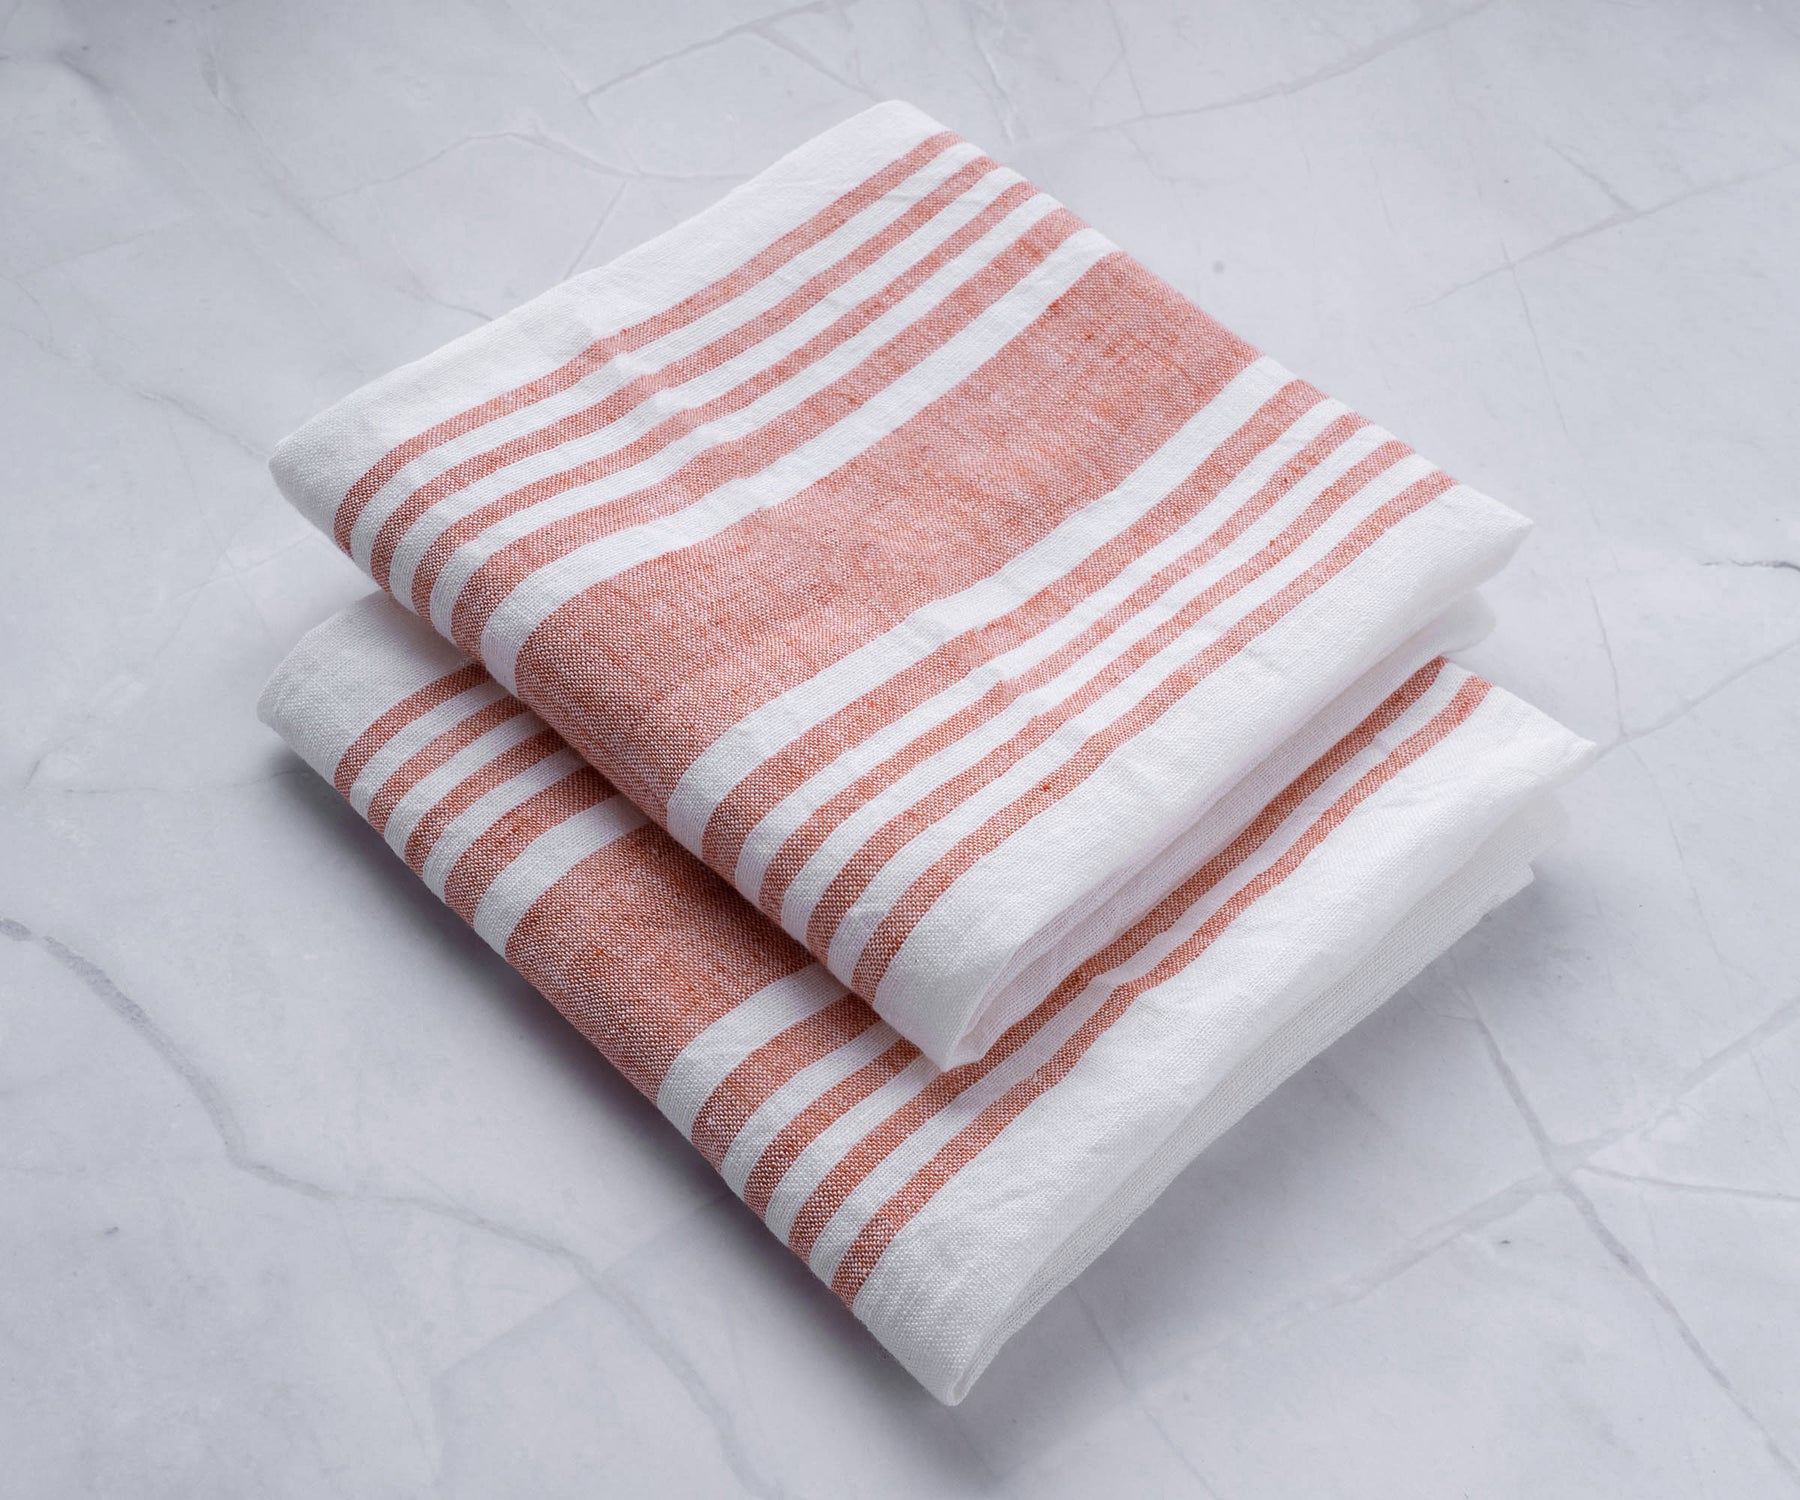 Embrace the irresistible charm and unmatched utility of linen kitchen towels and dish towels, seamlessly blending style and functionality to enrich your kitchen experience.